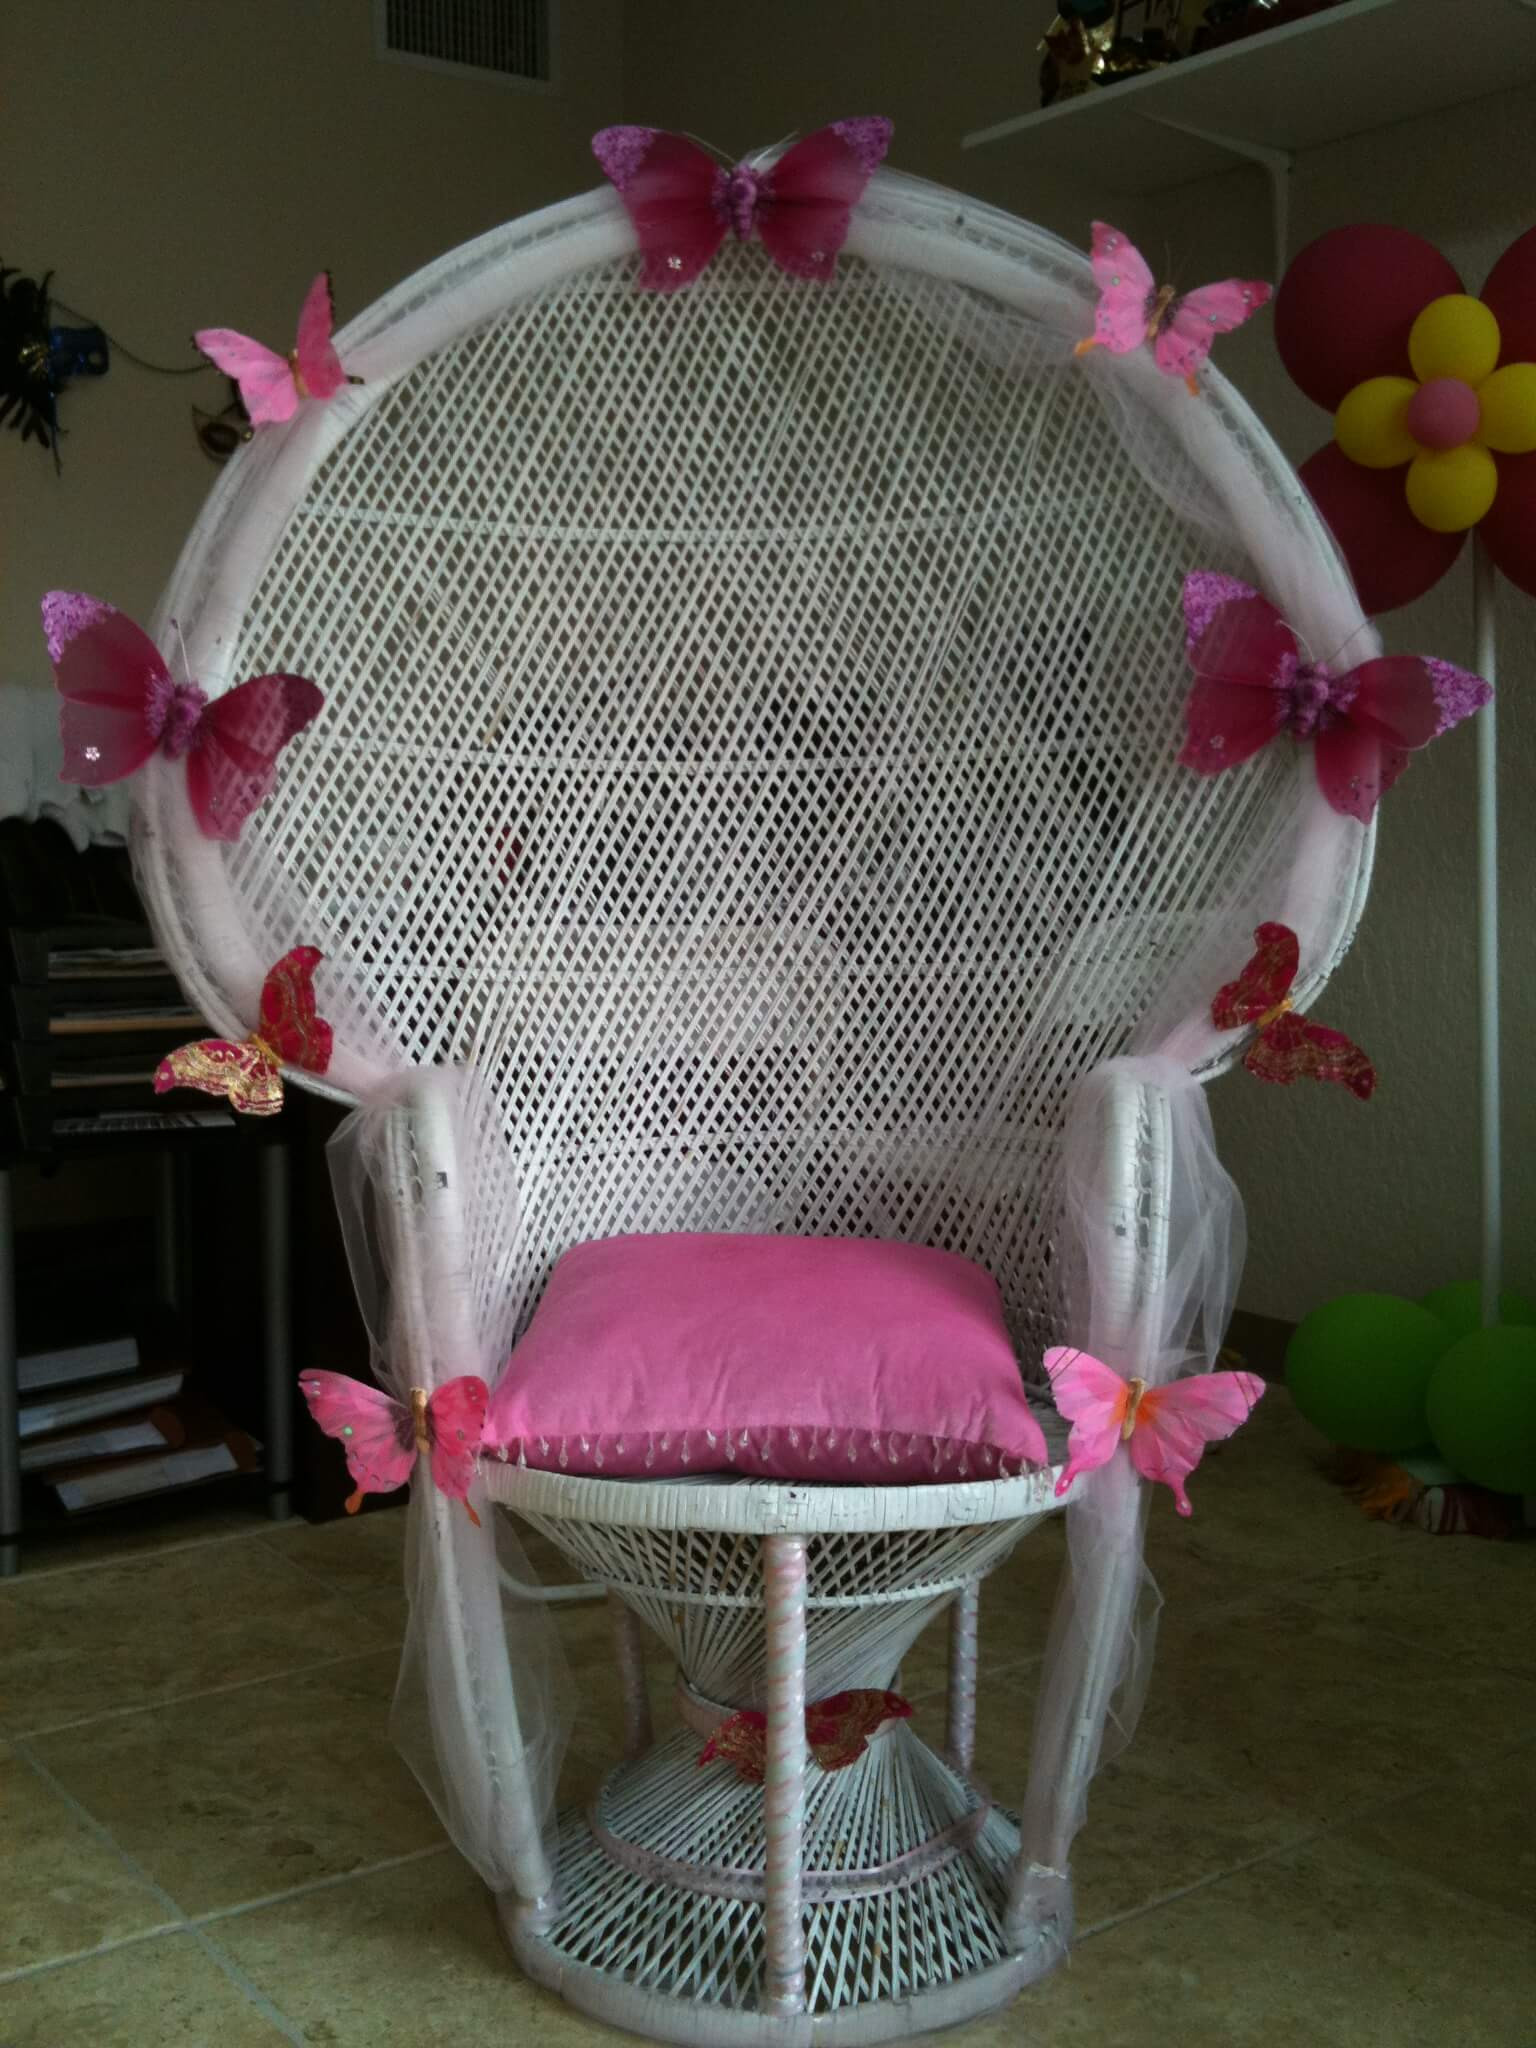 Baby Shower Decor Pictures
 Choosing a Baby Shower Chair Baby Ideas